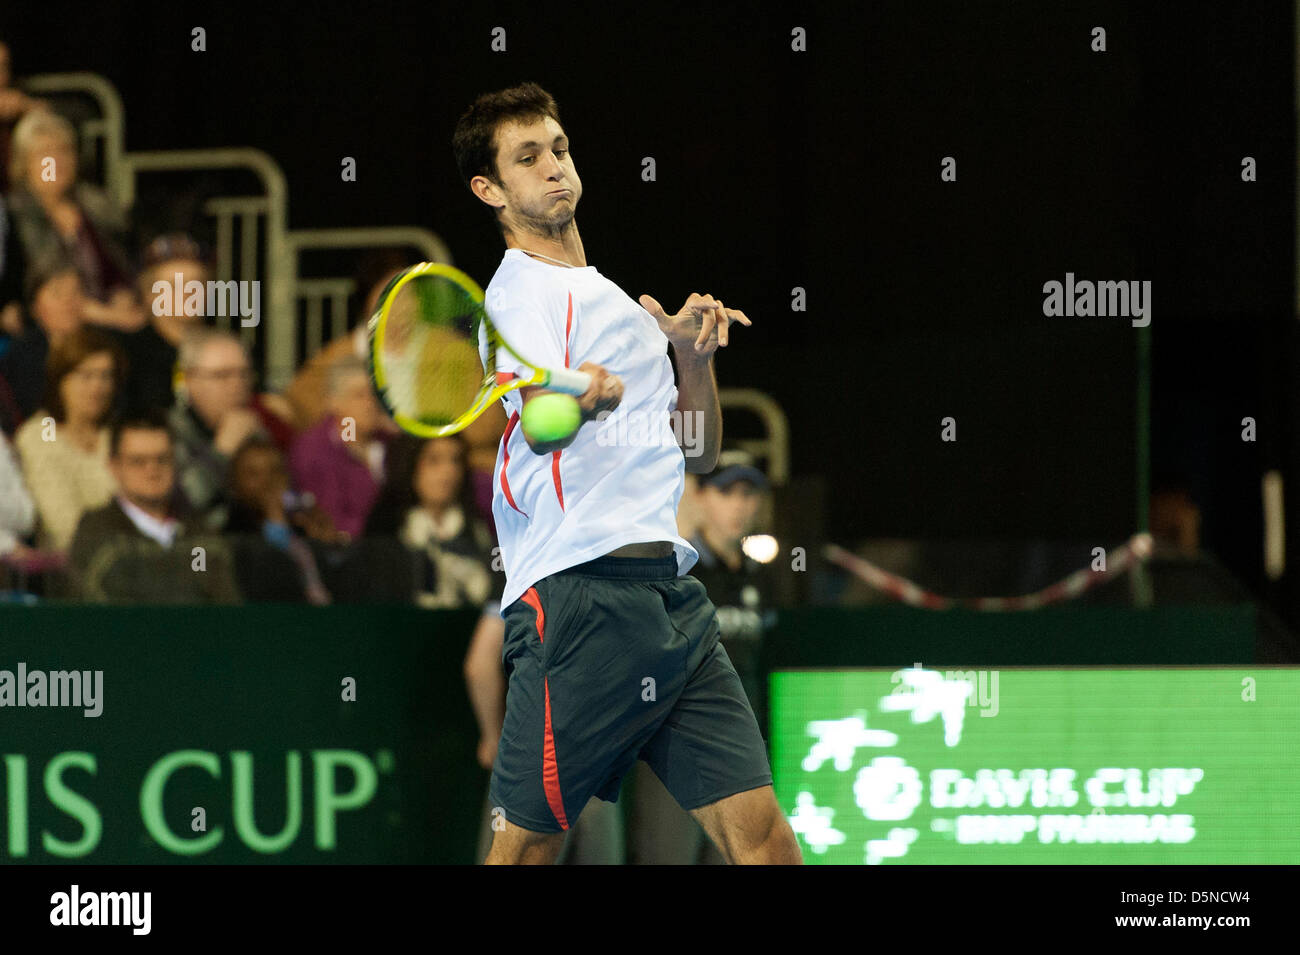 Coventry, UK. 5th April 2013.  Great Britain's James Ward playing against Russia's Evgeny Donskoy during the Euro/Africa Zone Group I Davis Cup tie between Great Britain and Russia from the Ricoh Arena. Credit: Action Plus Sports Images / Alamy Live News Stock Photo